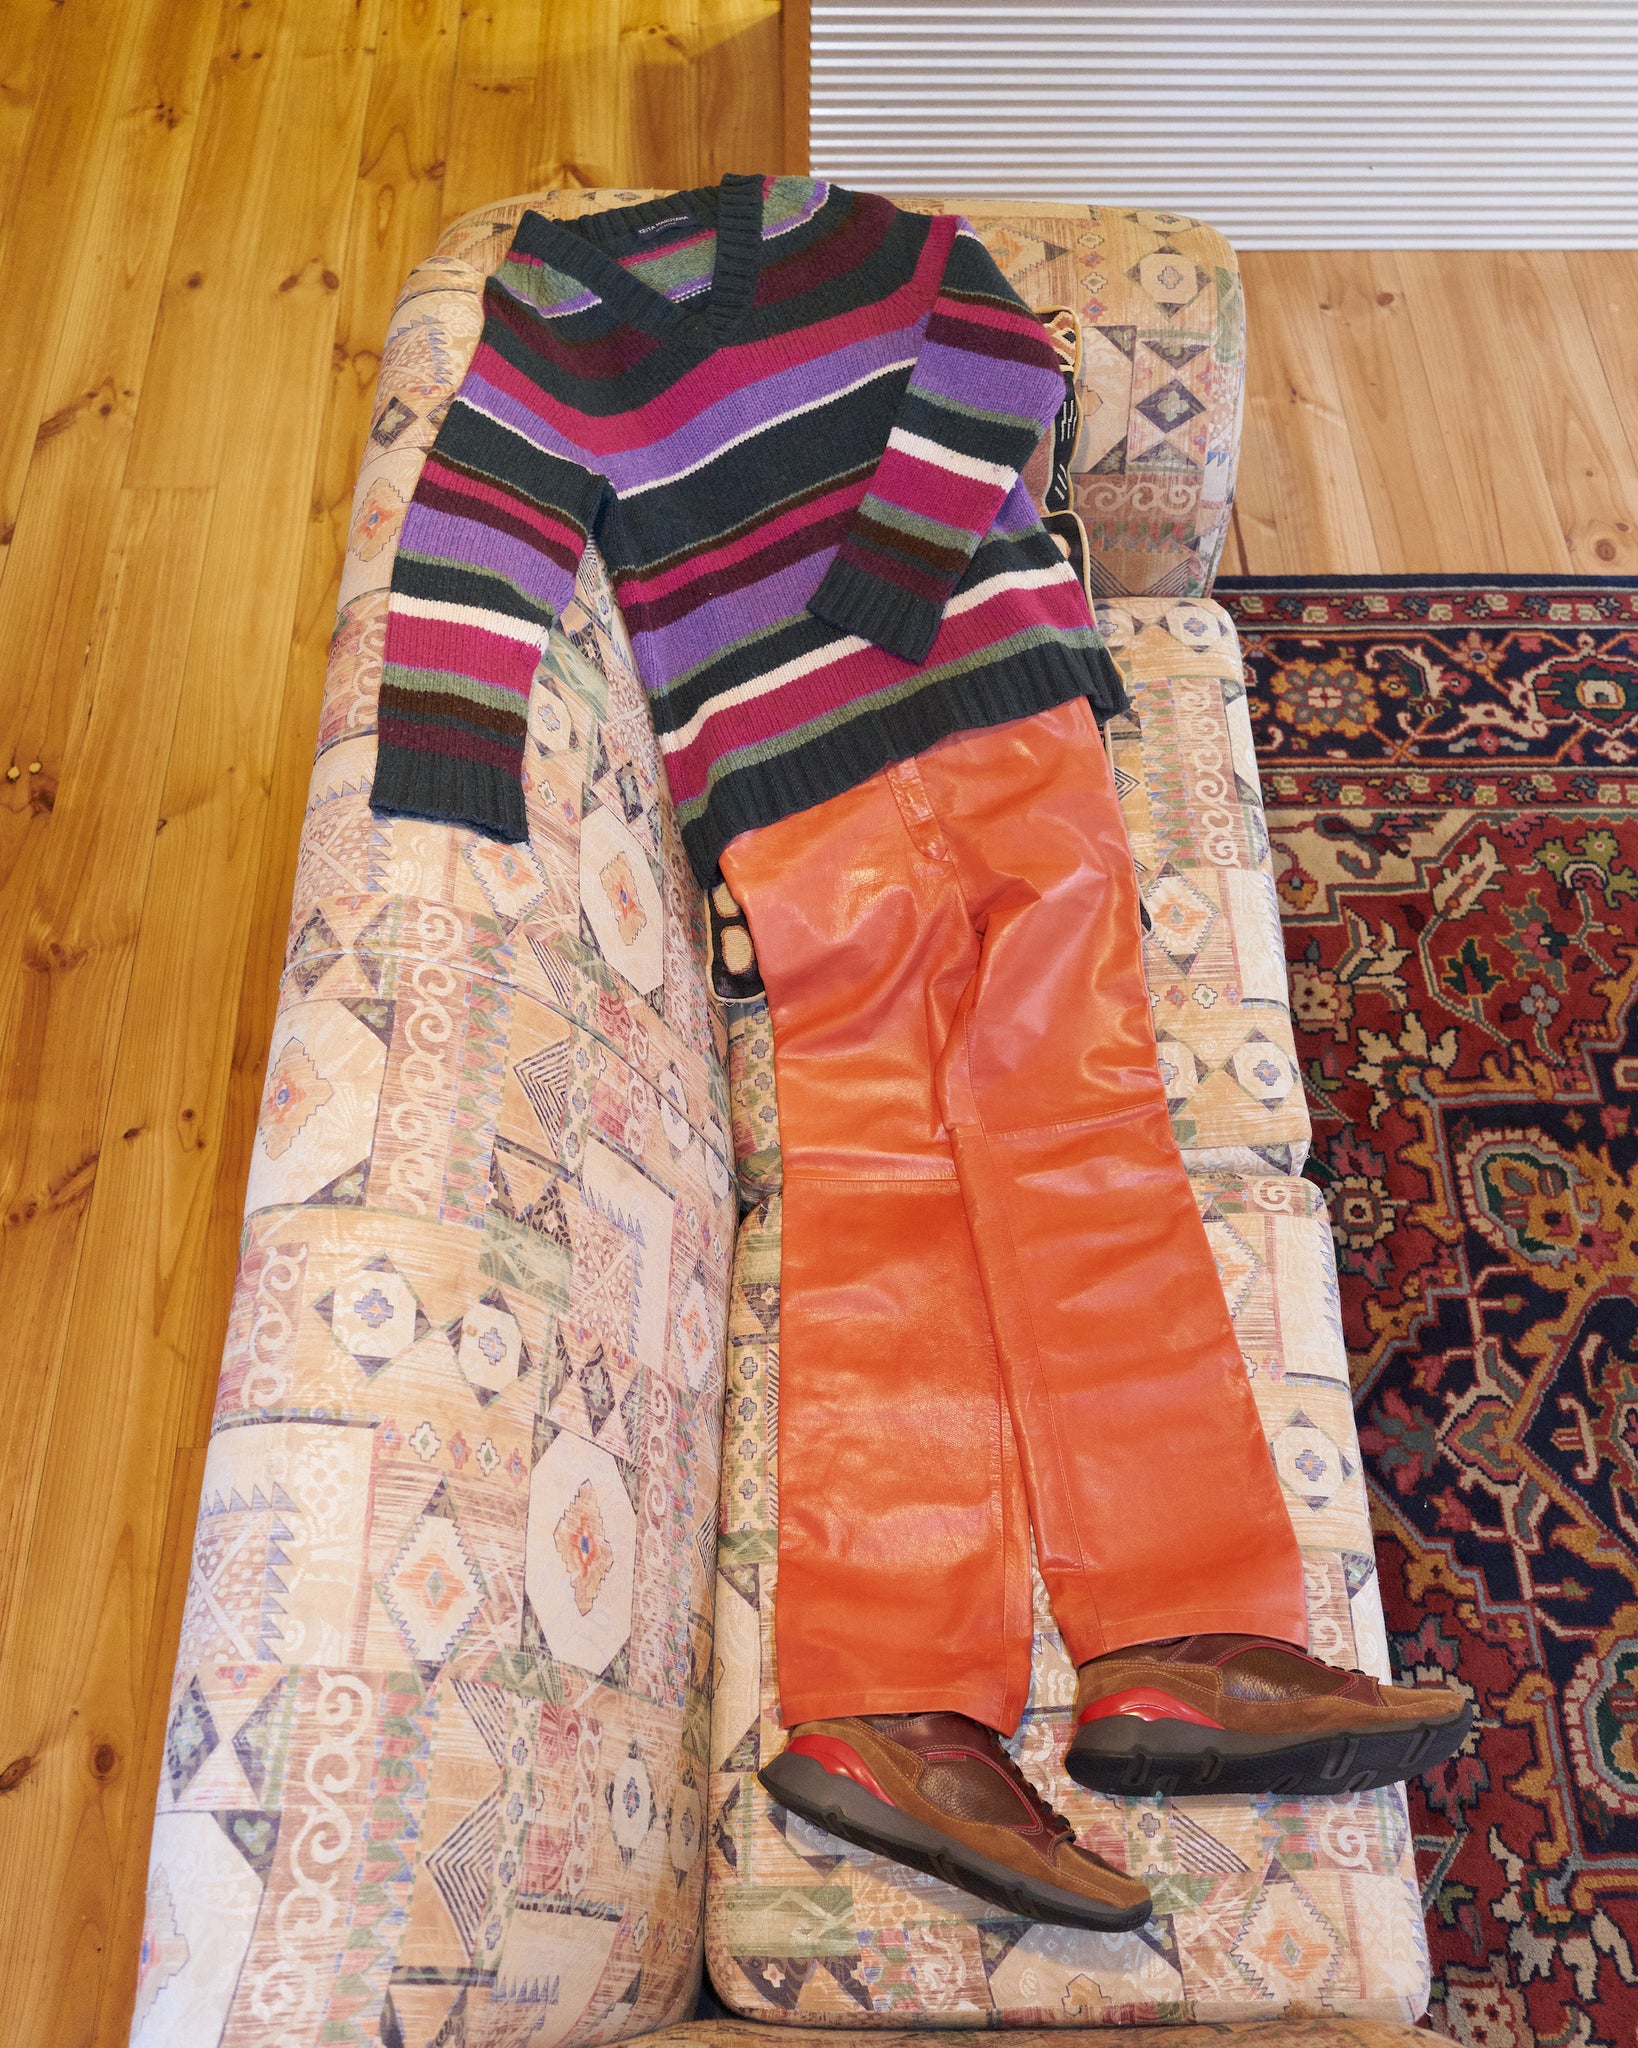 Patrick Cox Wannabe 1990s orange leather trousers with contrast waistband - S